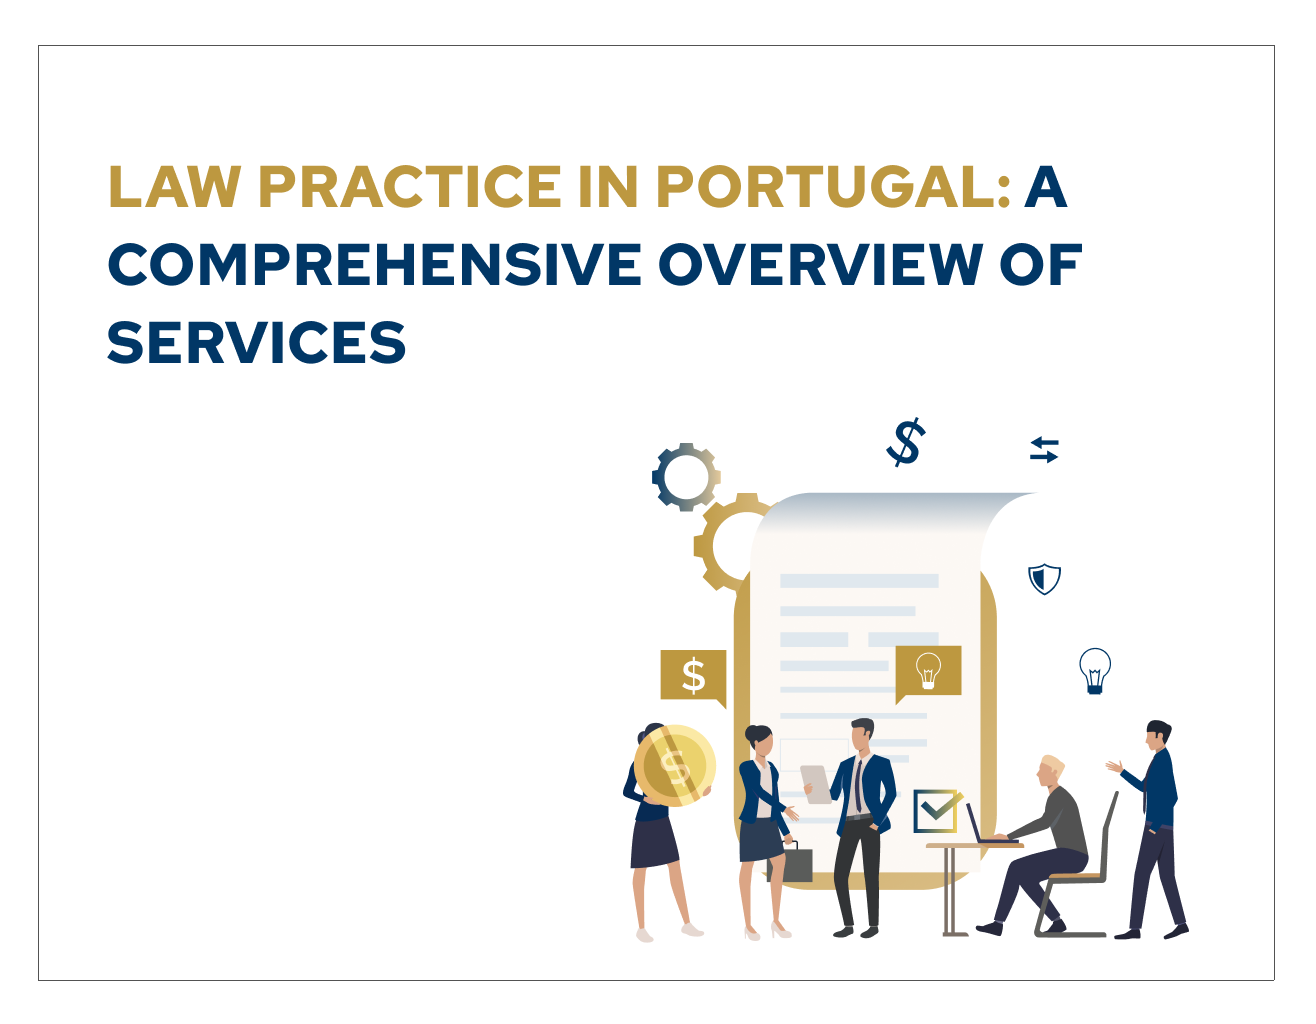 Law Practice in Portugal: A Comprehensive Overview of Services